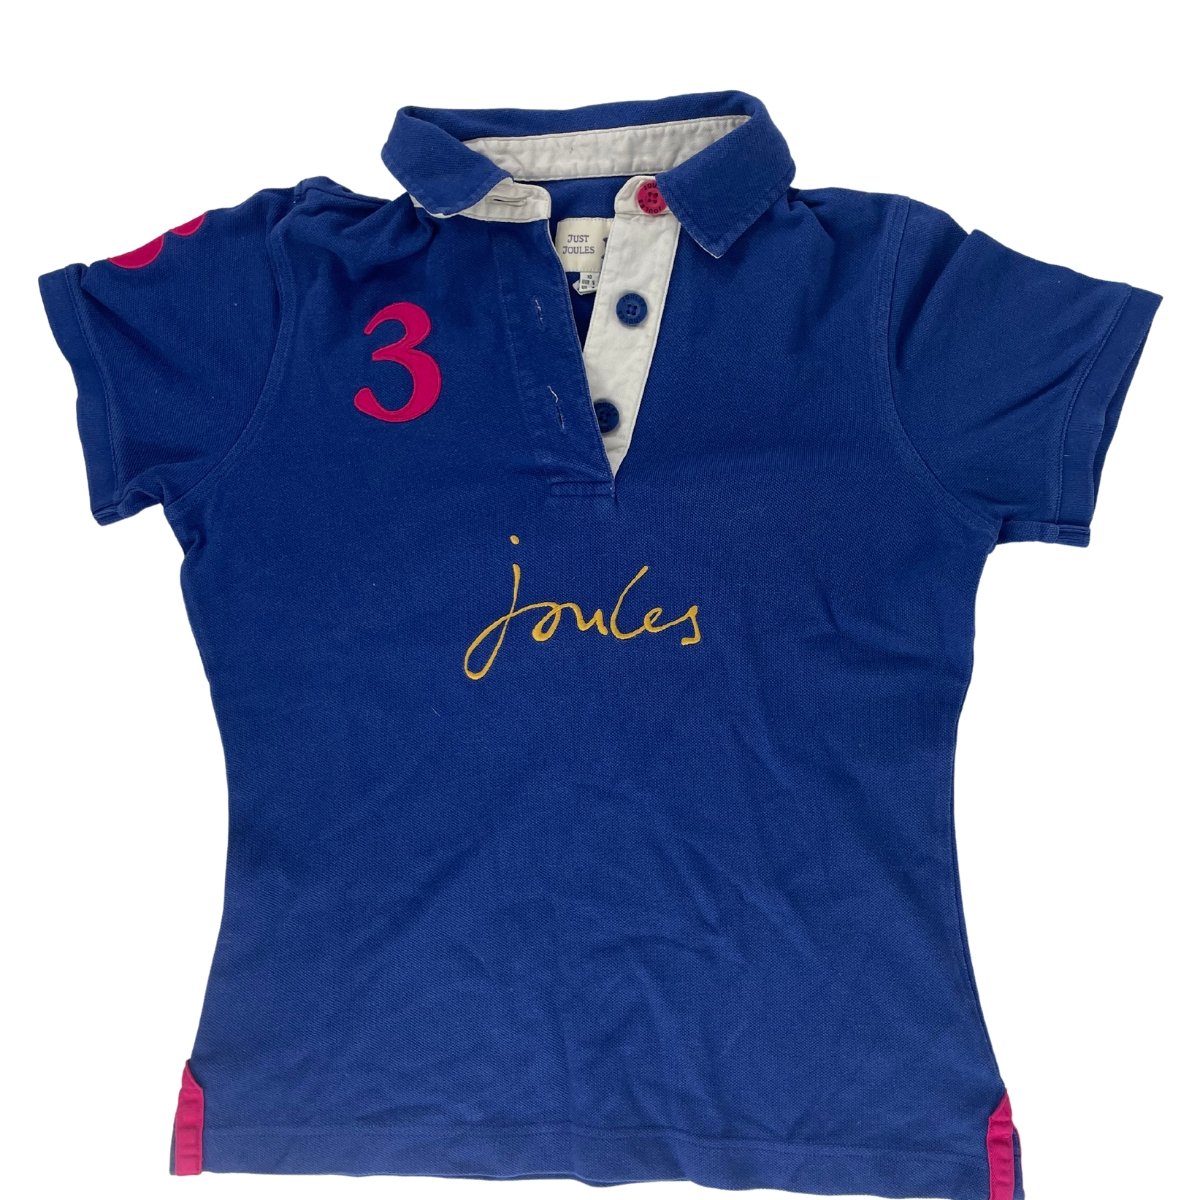 Polo Joules - Osmoz sellerie - Joules